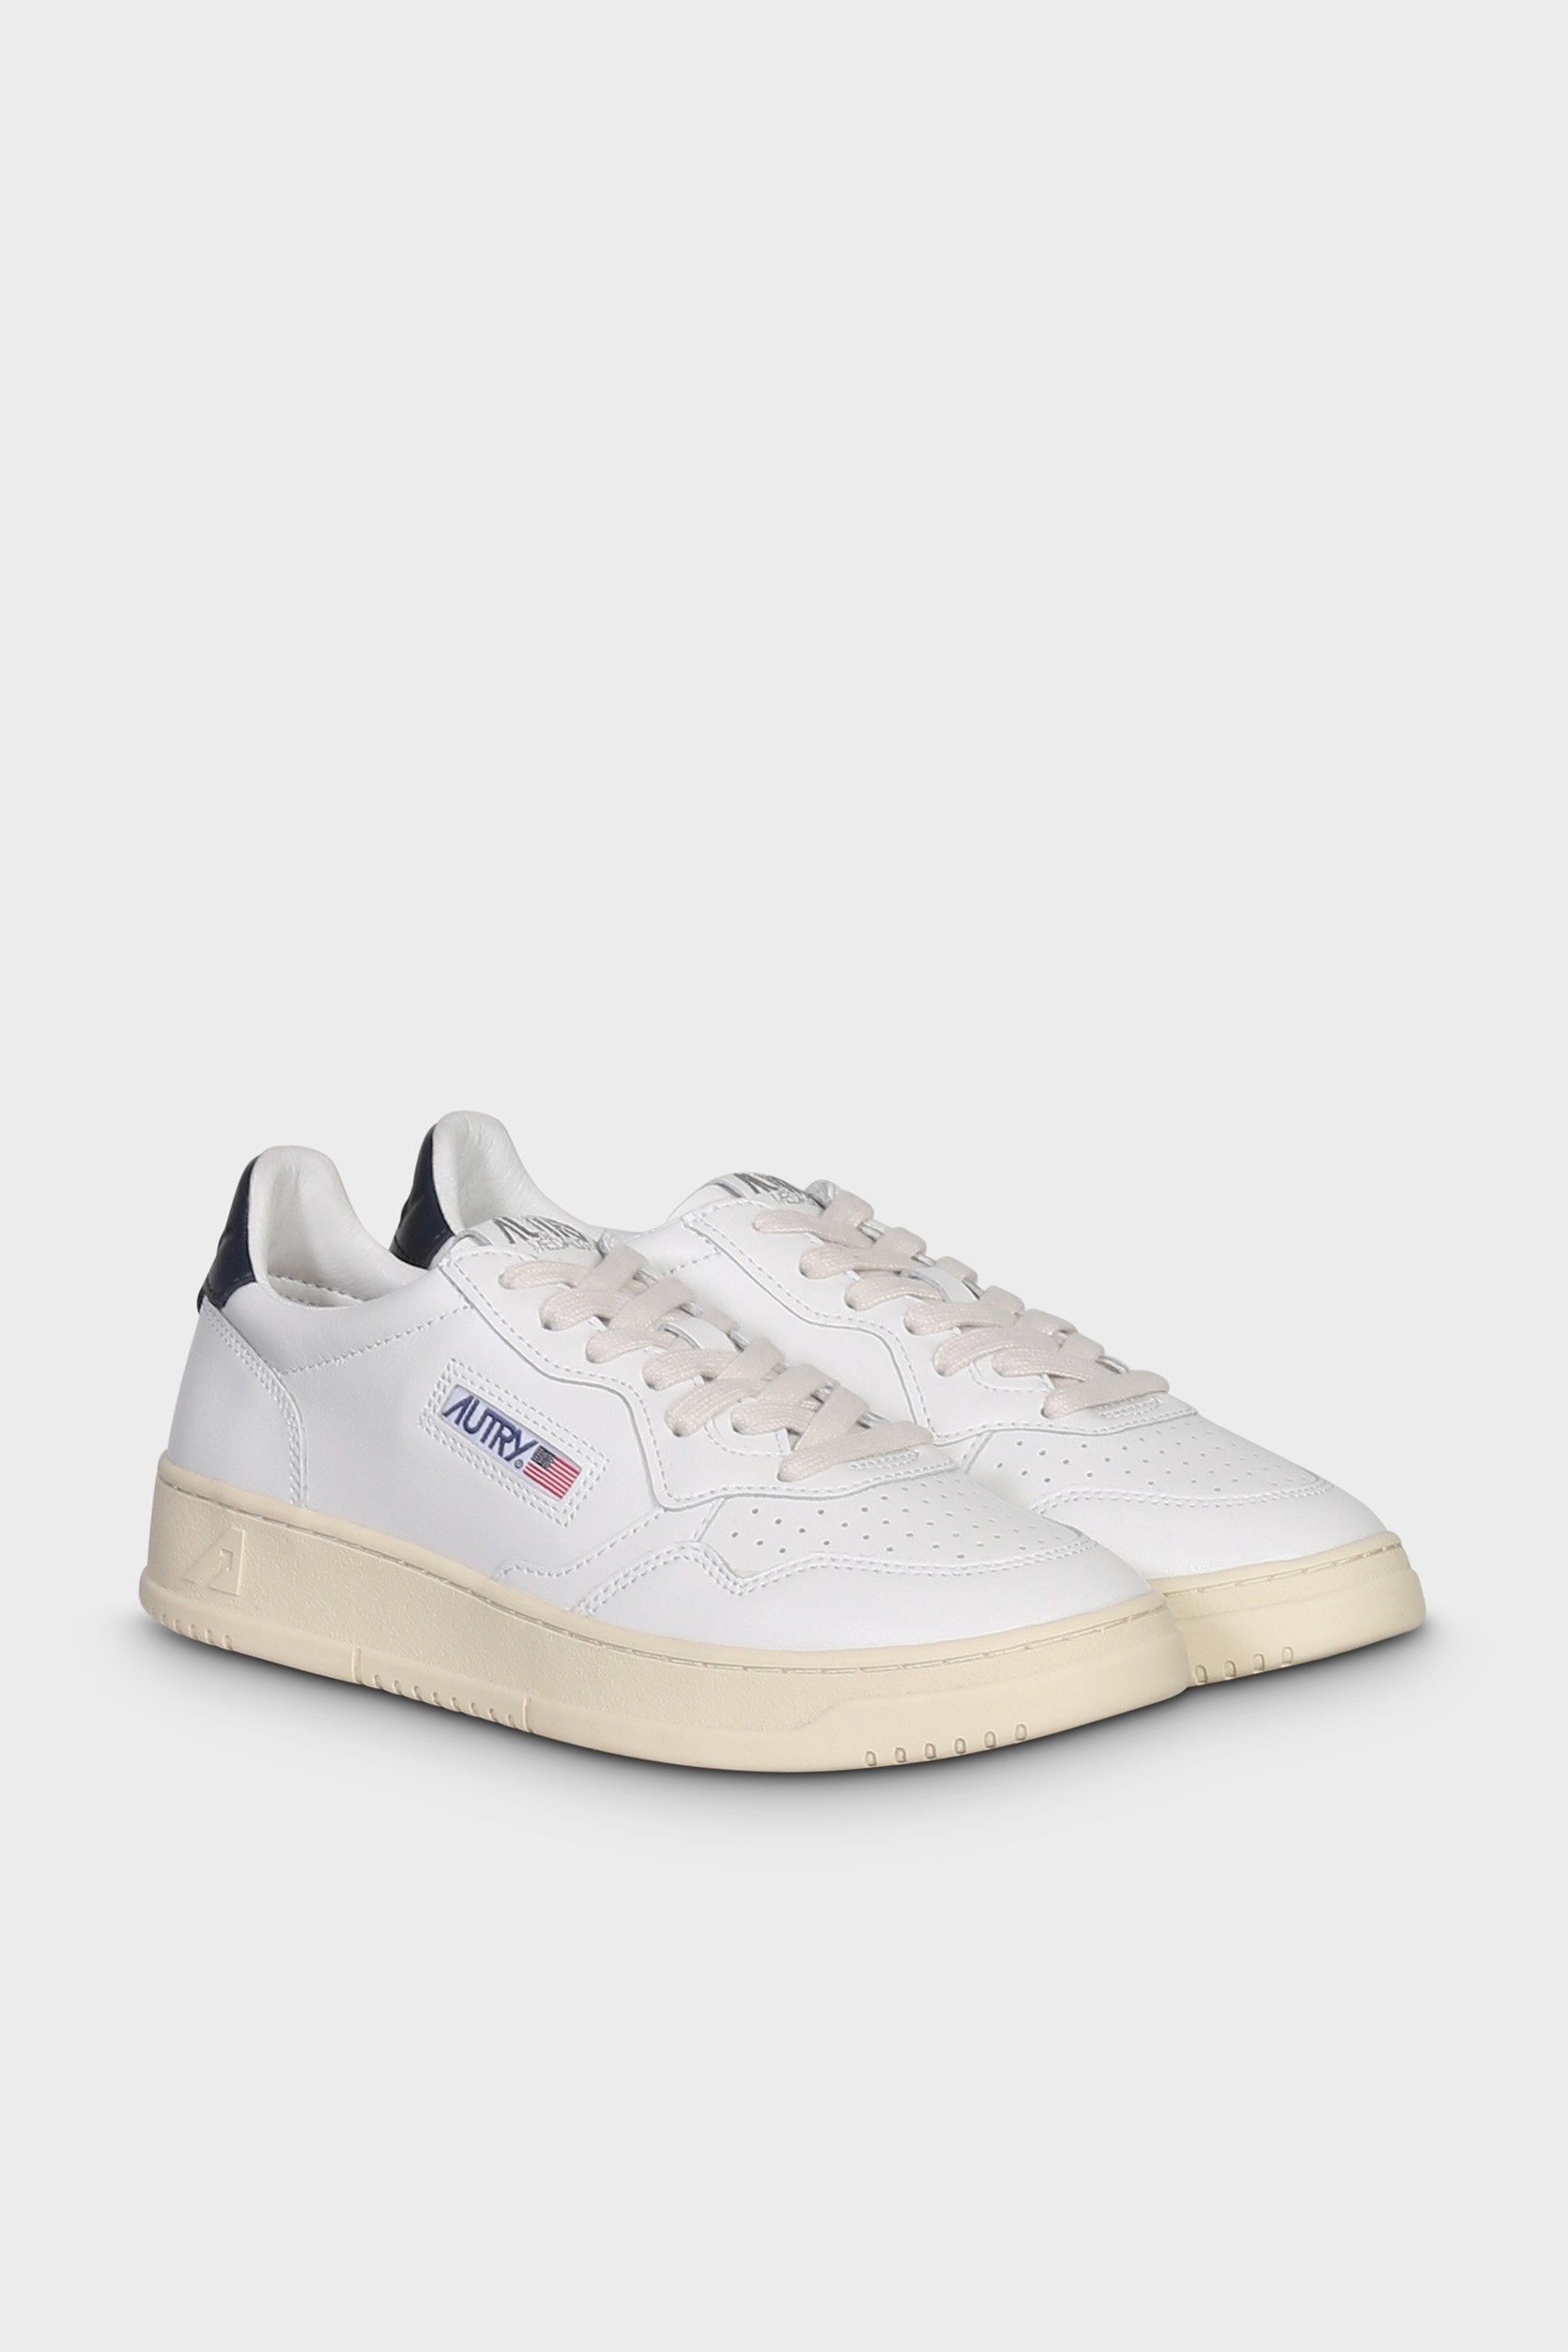 AUTRY ACTION SHOES Sneaker Low in White/Malachi Green 38